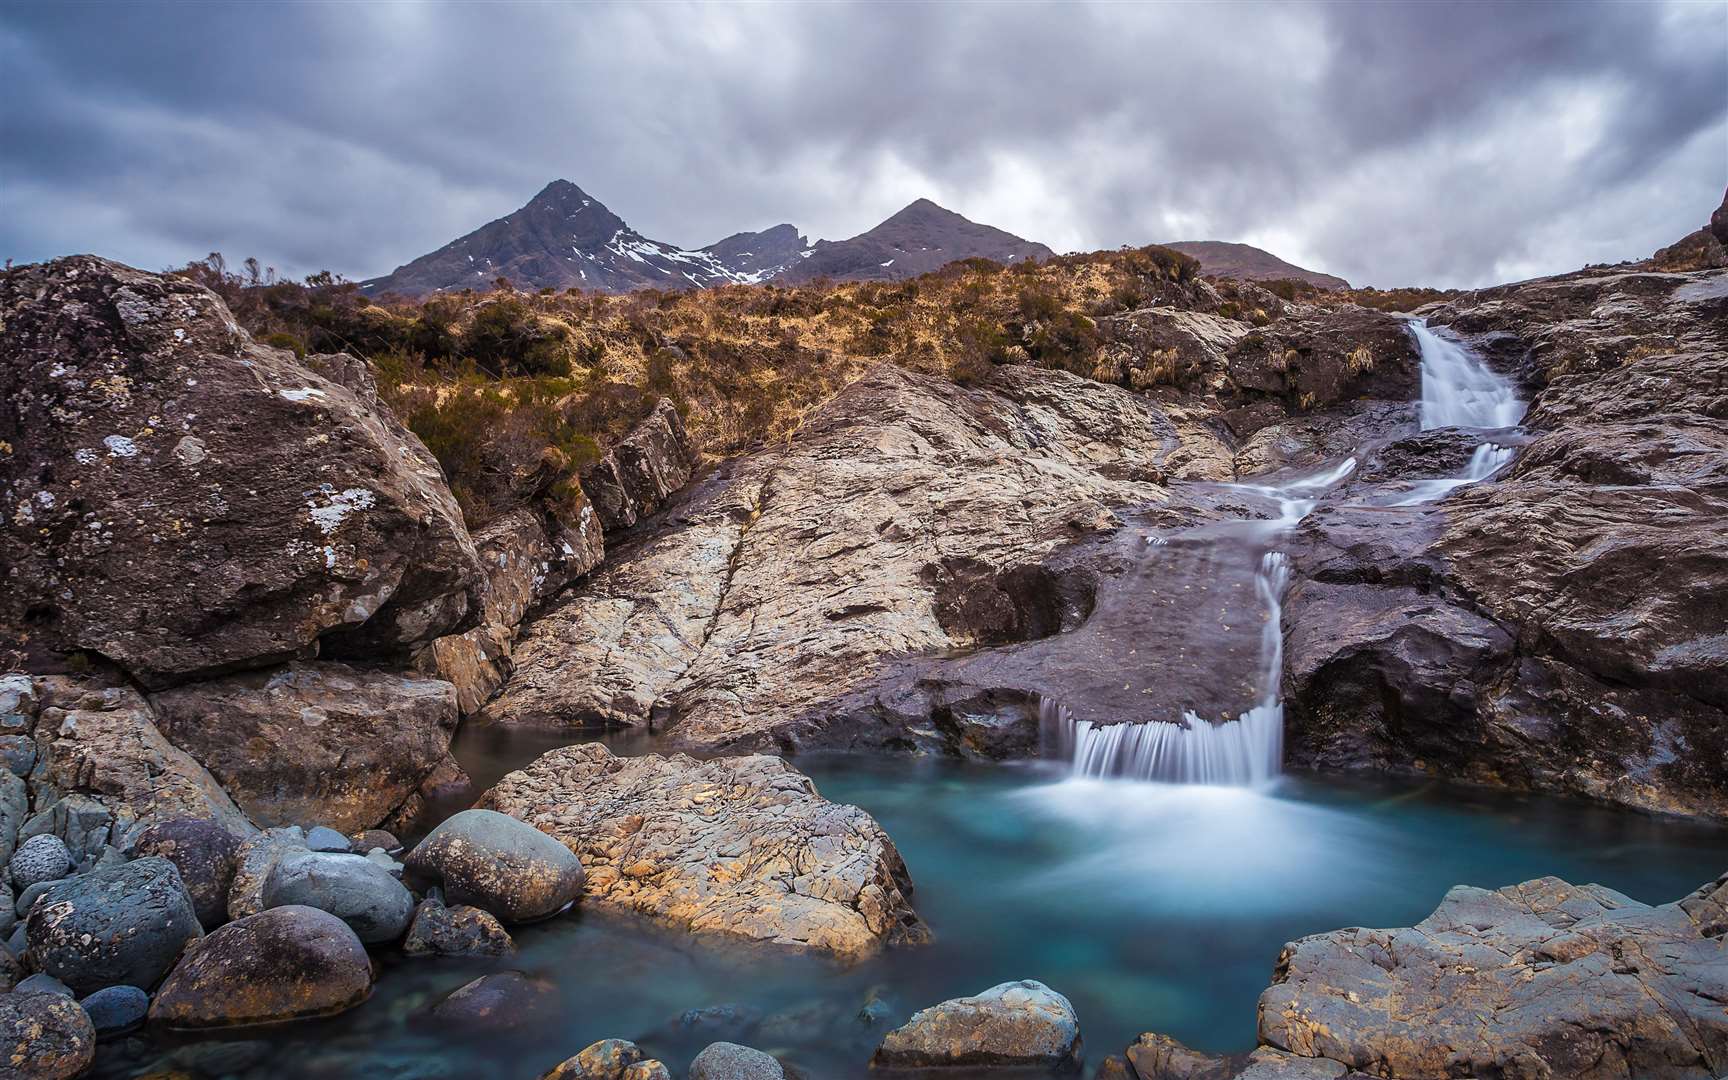 The Fairy Pools on Skye are a big hit with tourists, but the site has become overwhelmed with visitors in recent years.